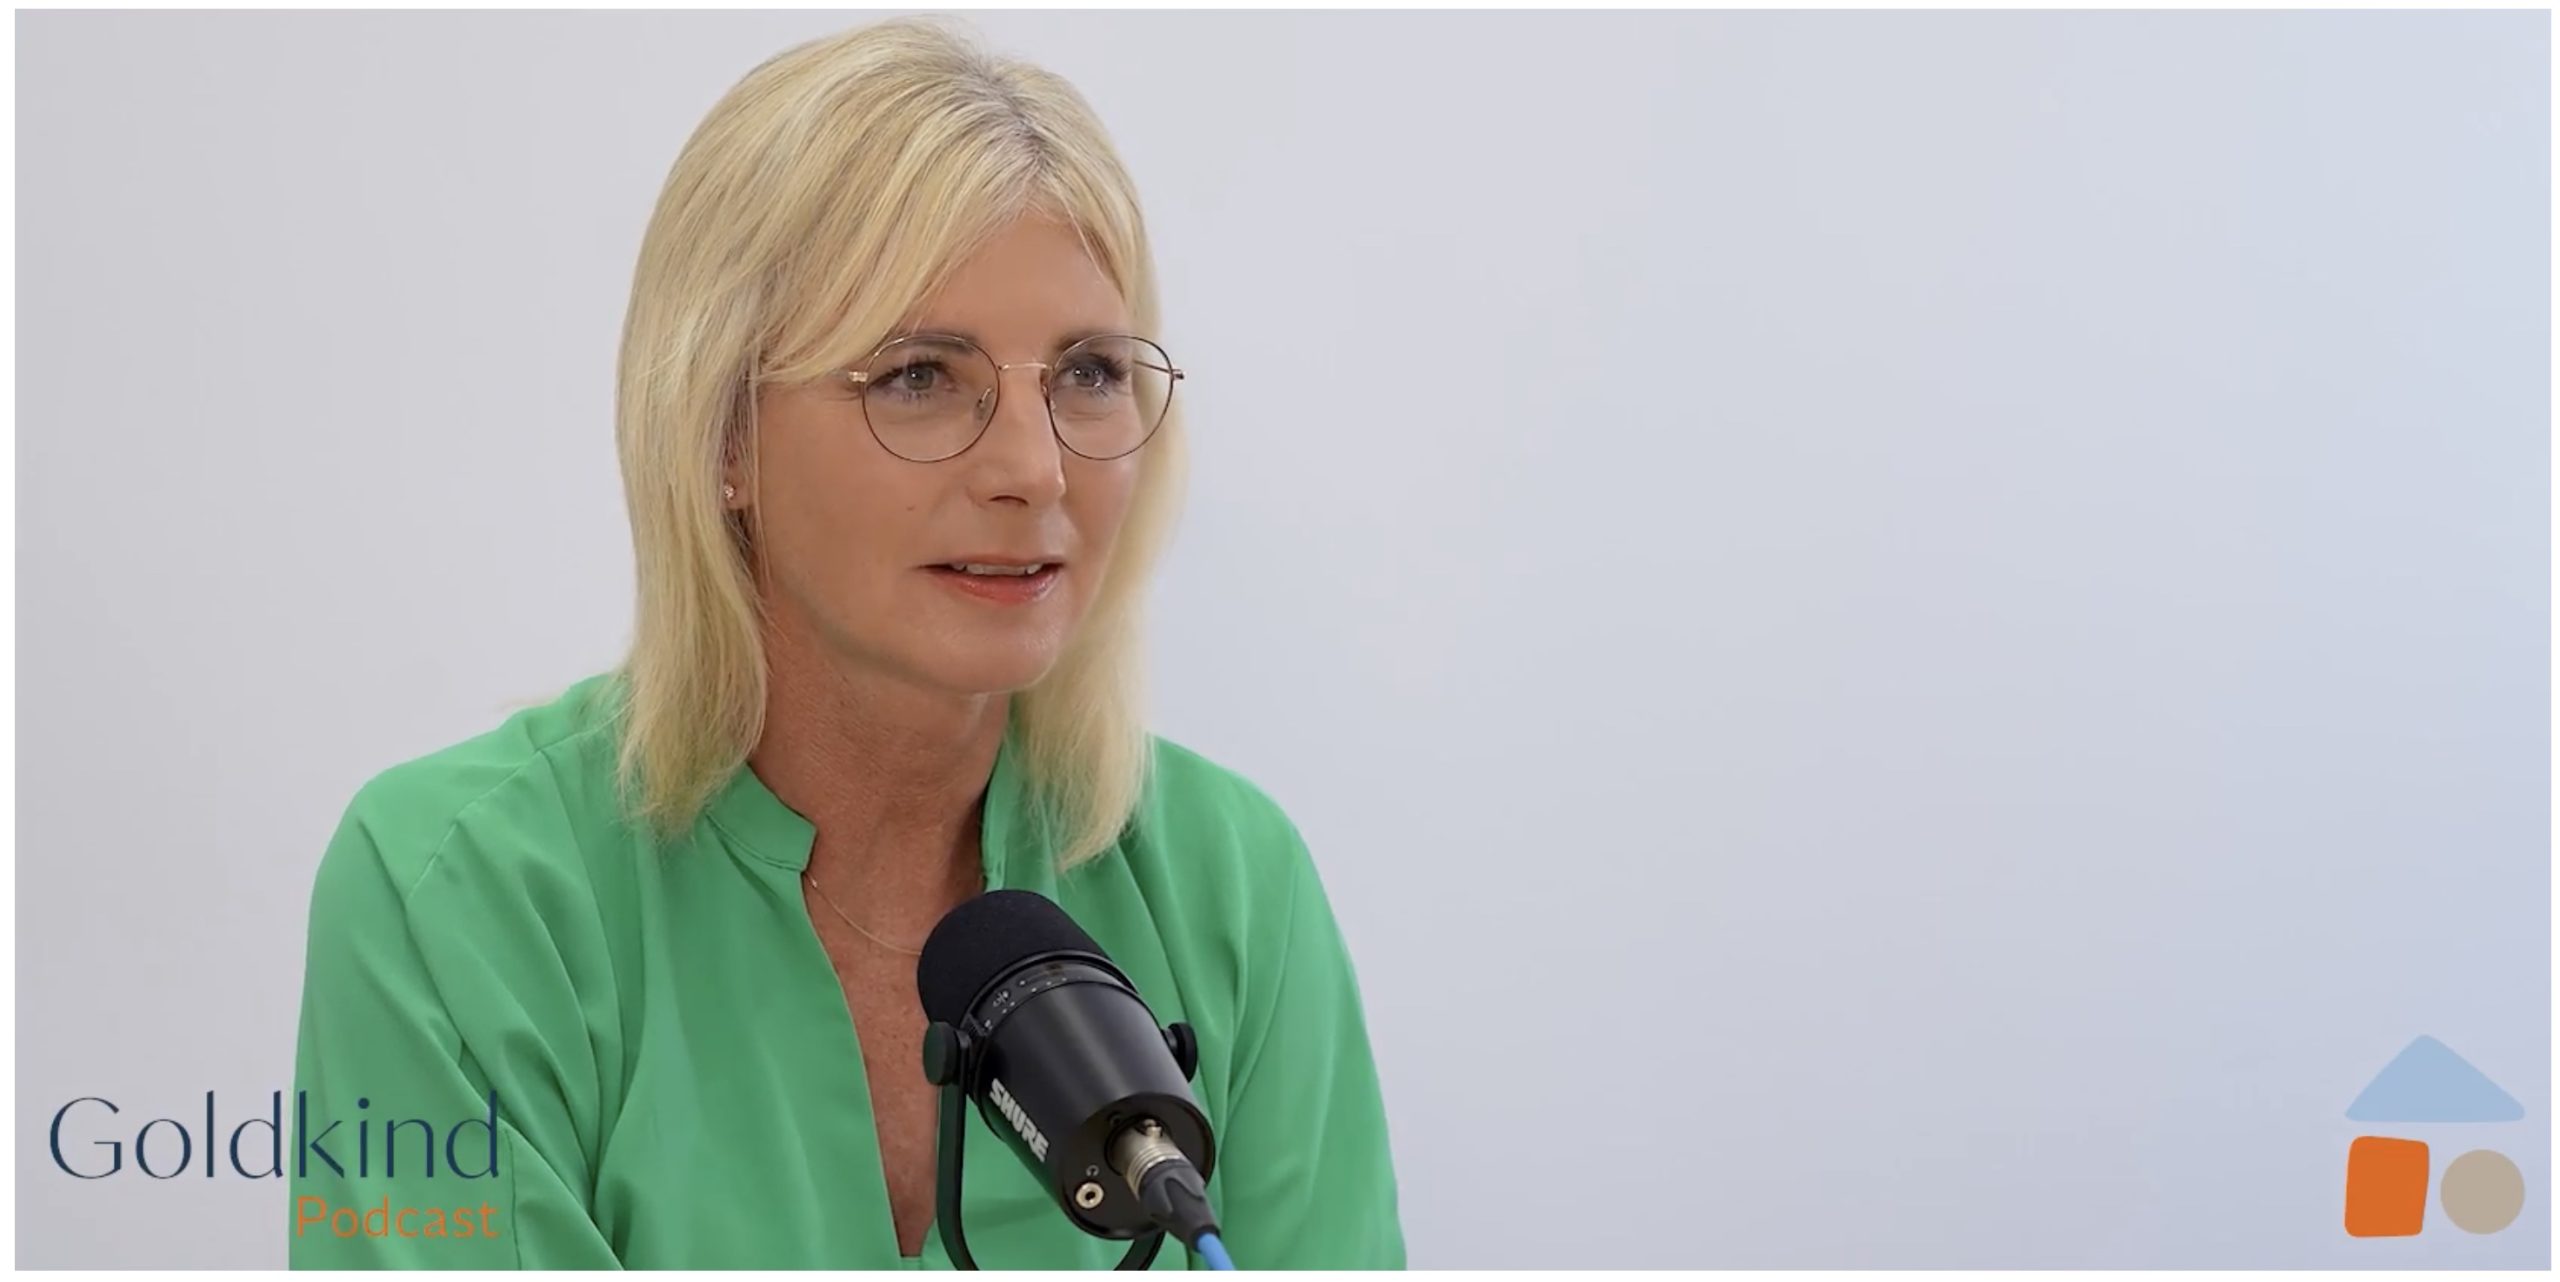 Ulrike Scharf, Familienministerin in Bayern, beim GOLDKIND-Video-Podcast.